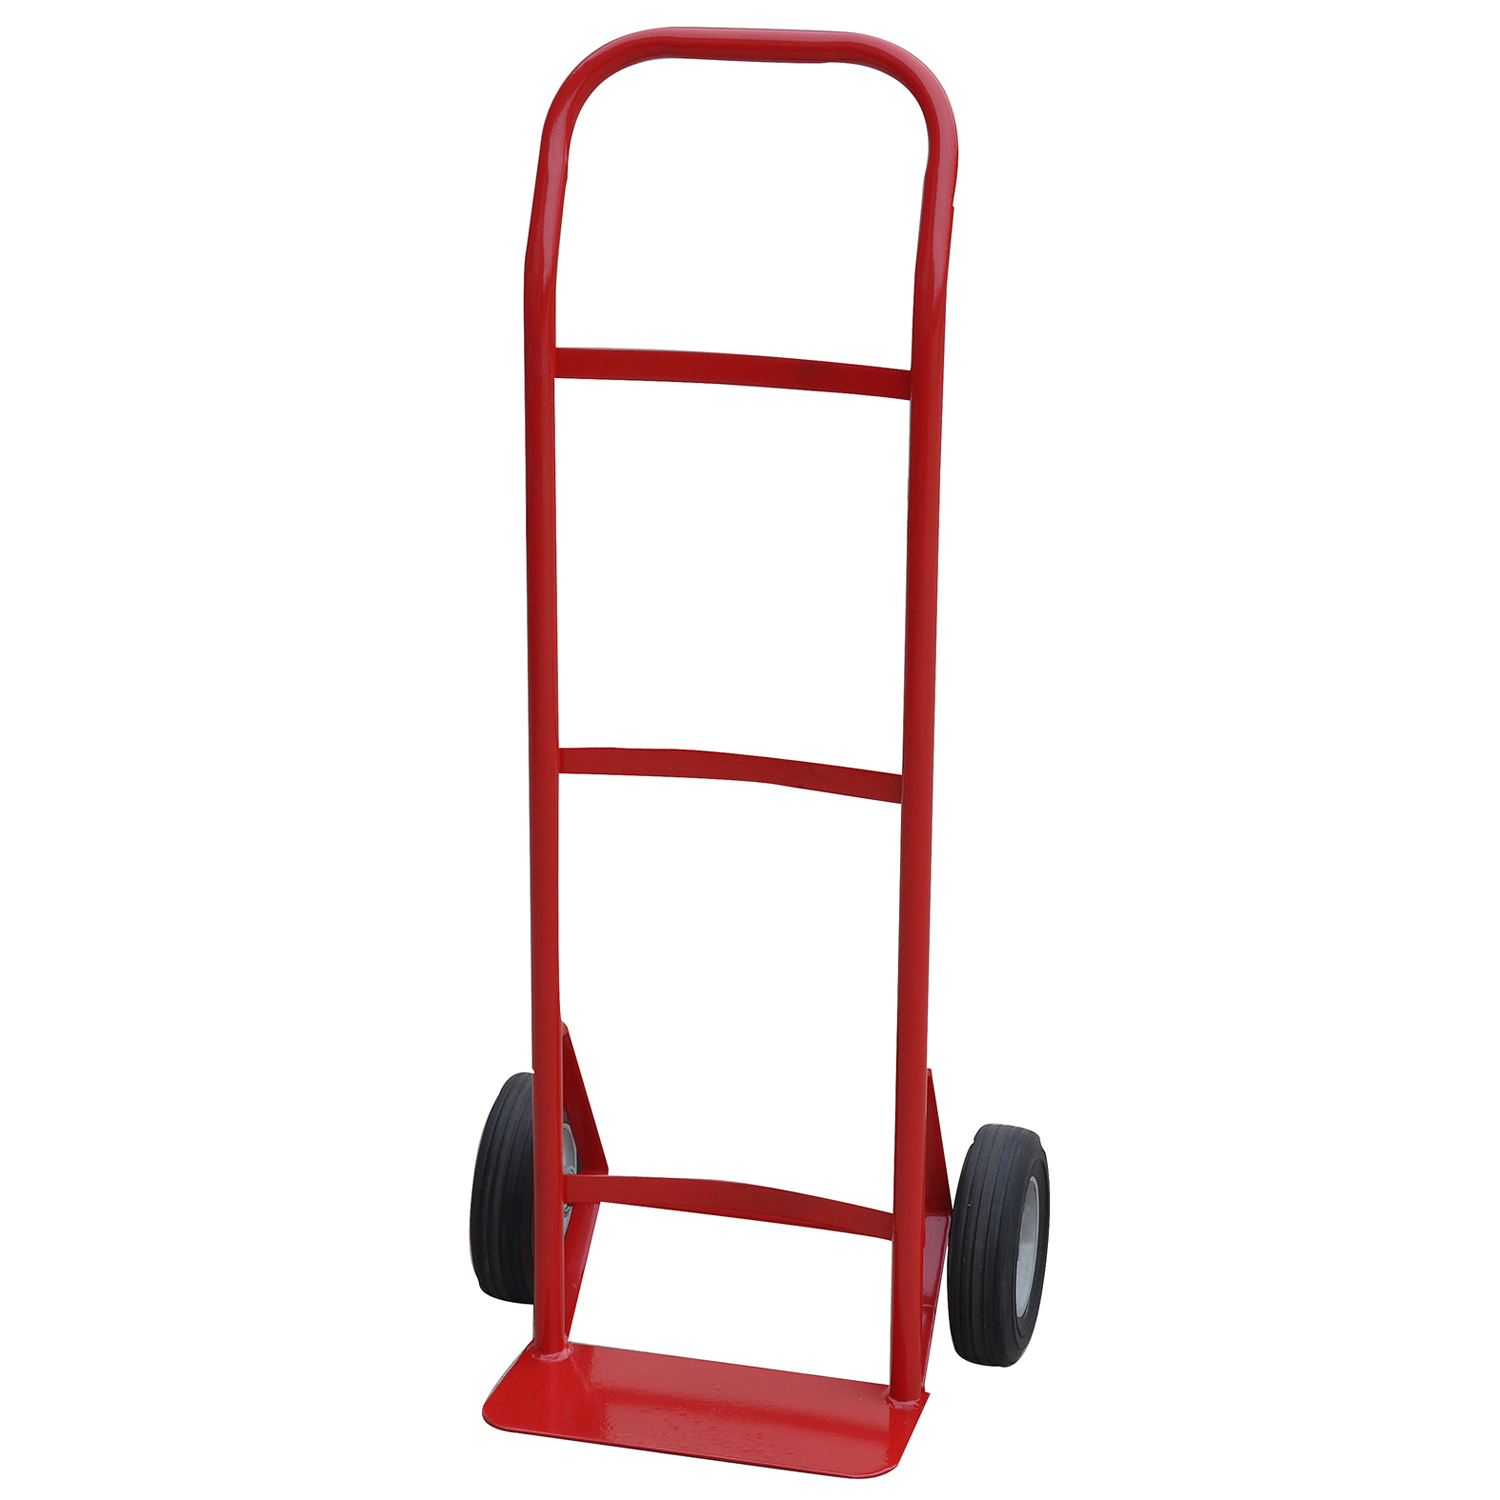 Milwaukee 37109 Flow Back Hand Truck, 600 Lb Capacity, Red - image 1 of 1